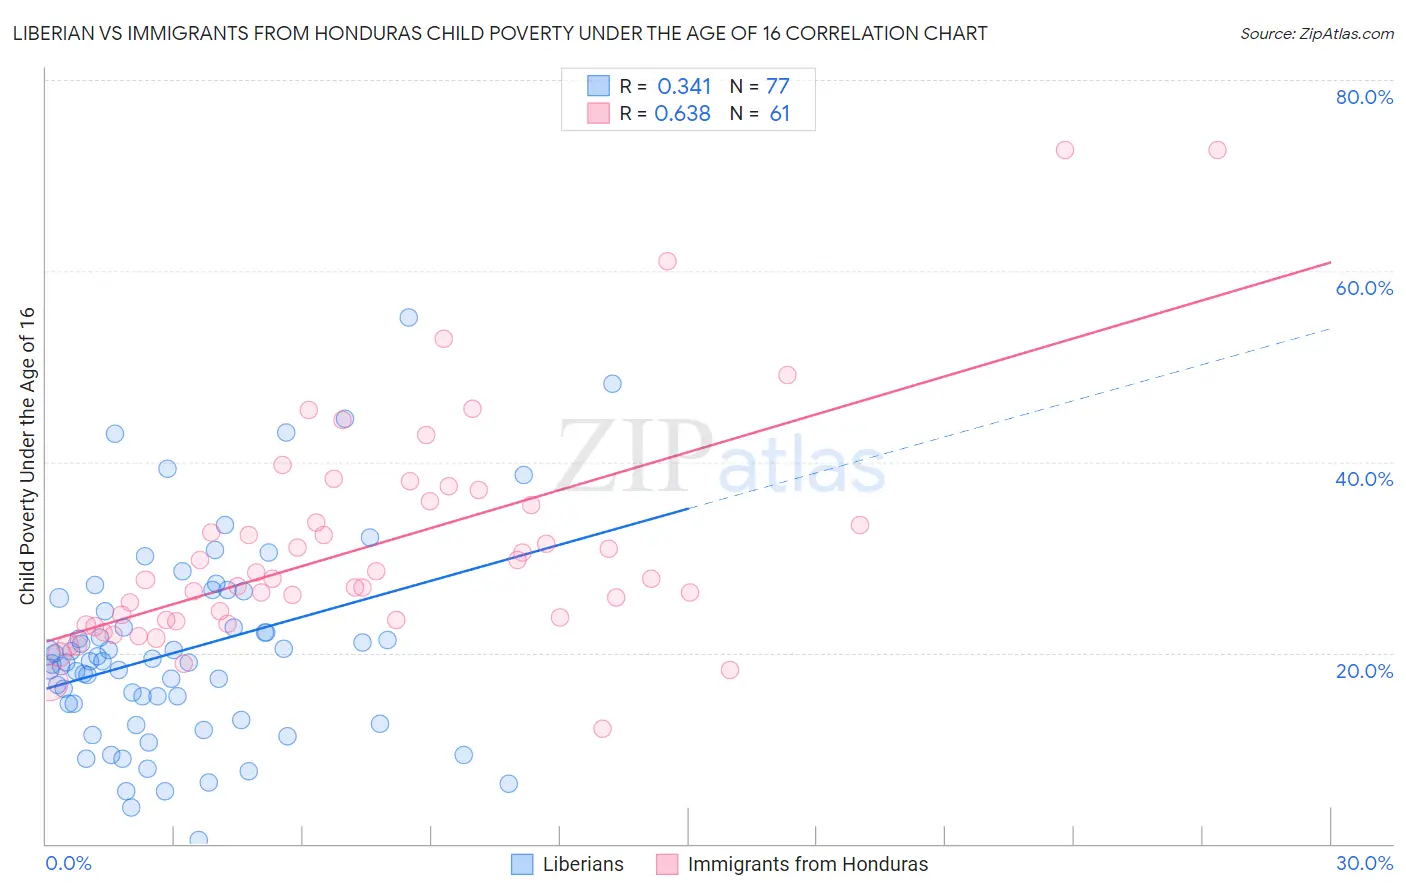 Liberian vs Immigrants from Honduras Child Poverty Under the Age of 16